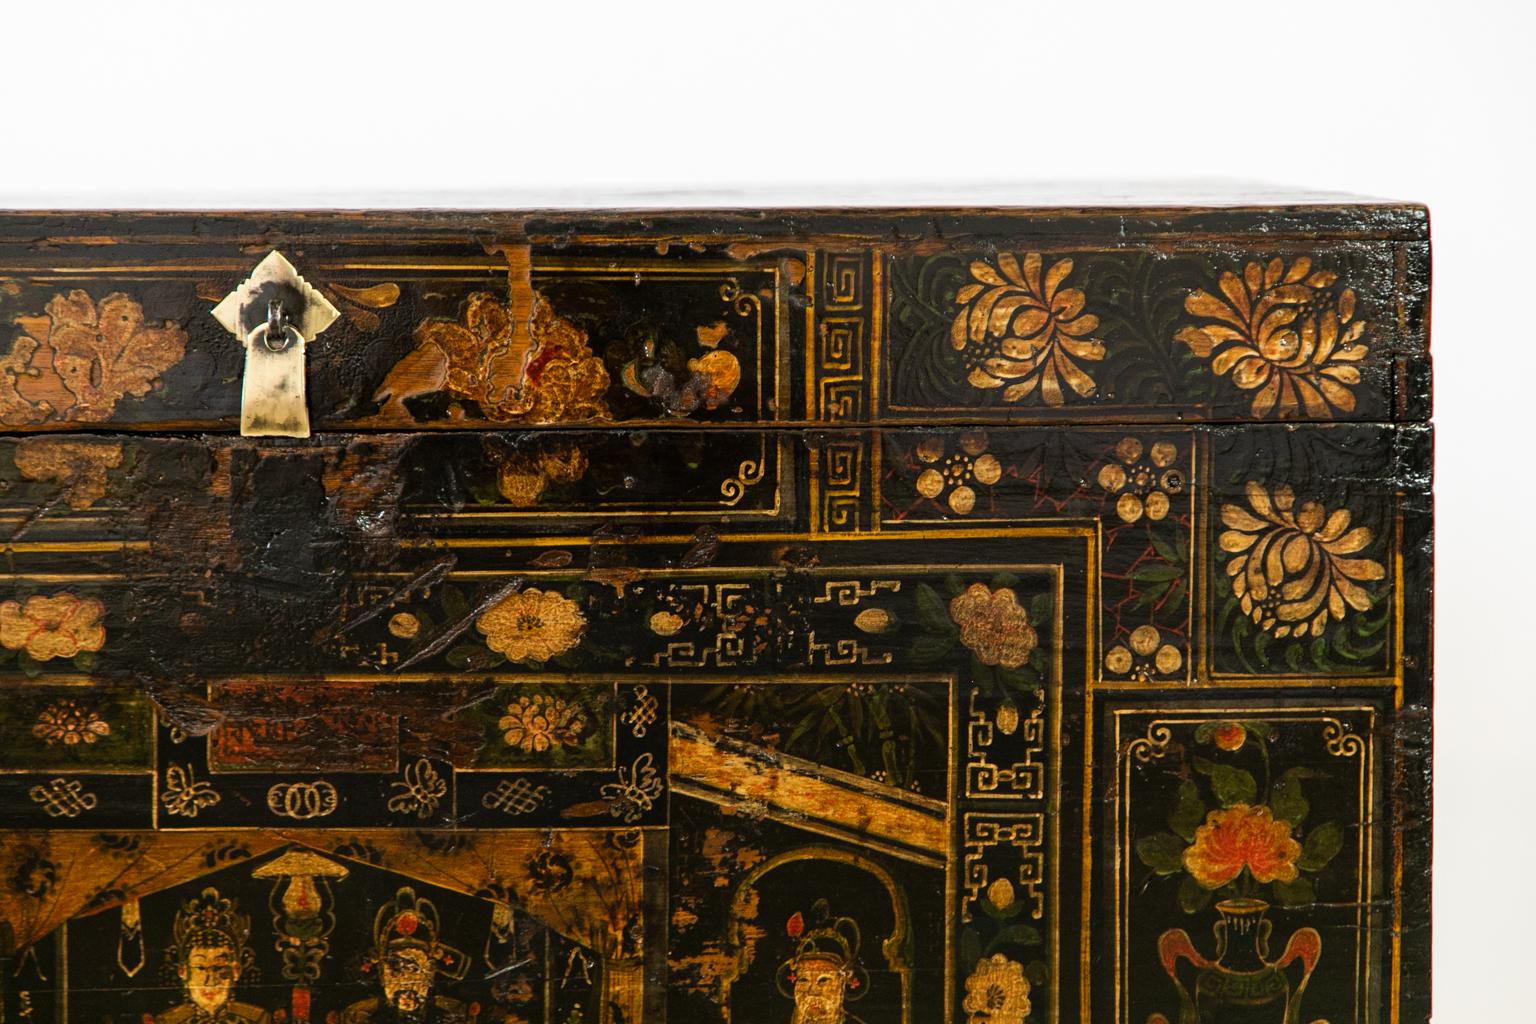 Teakwood Chinese Painted Storage Trunk has the original steel hinges with some replacement screws. The painting depicts floral designs with vases, flowers, and mandarin figures at a table having tea with attendants standing in an adjacent doorway.